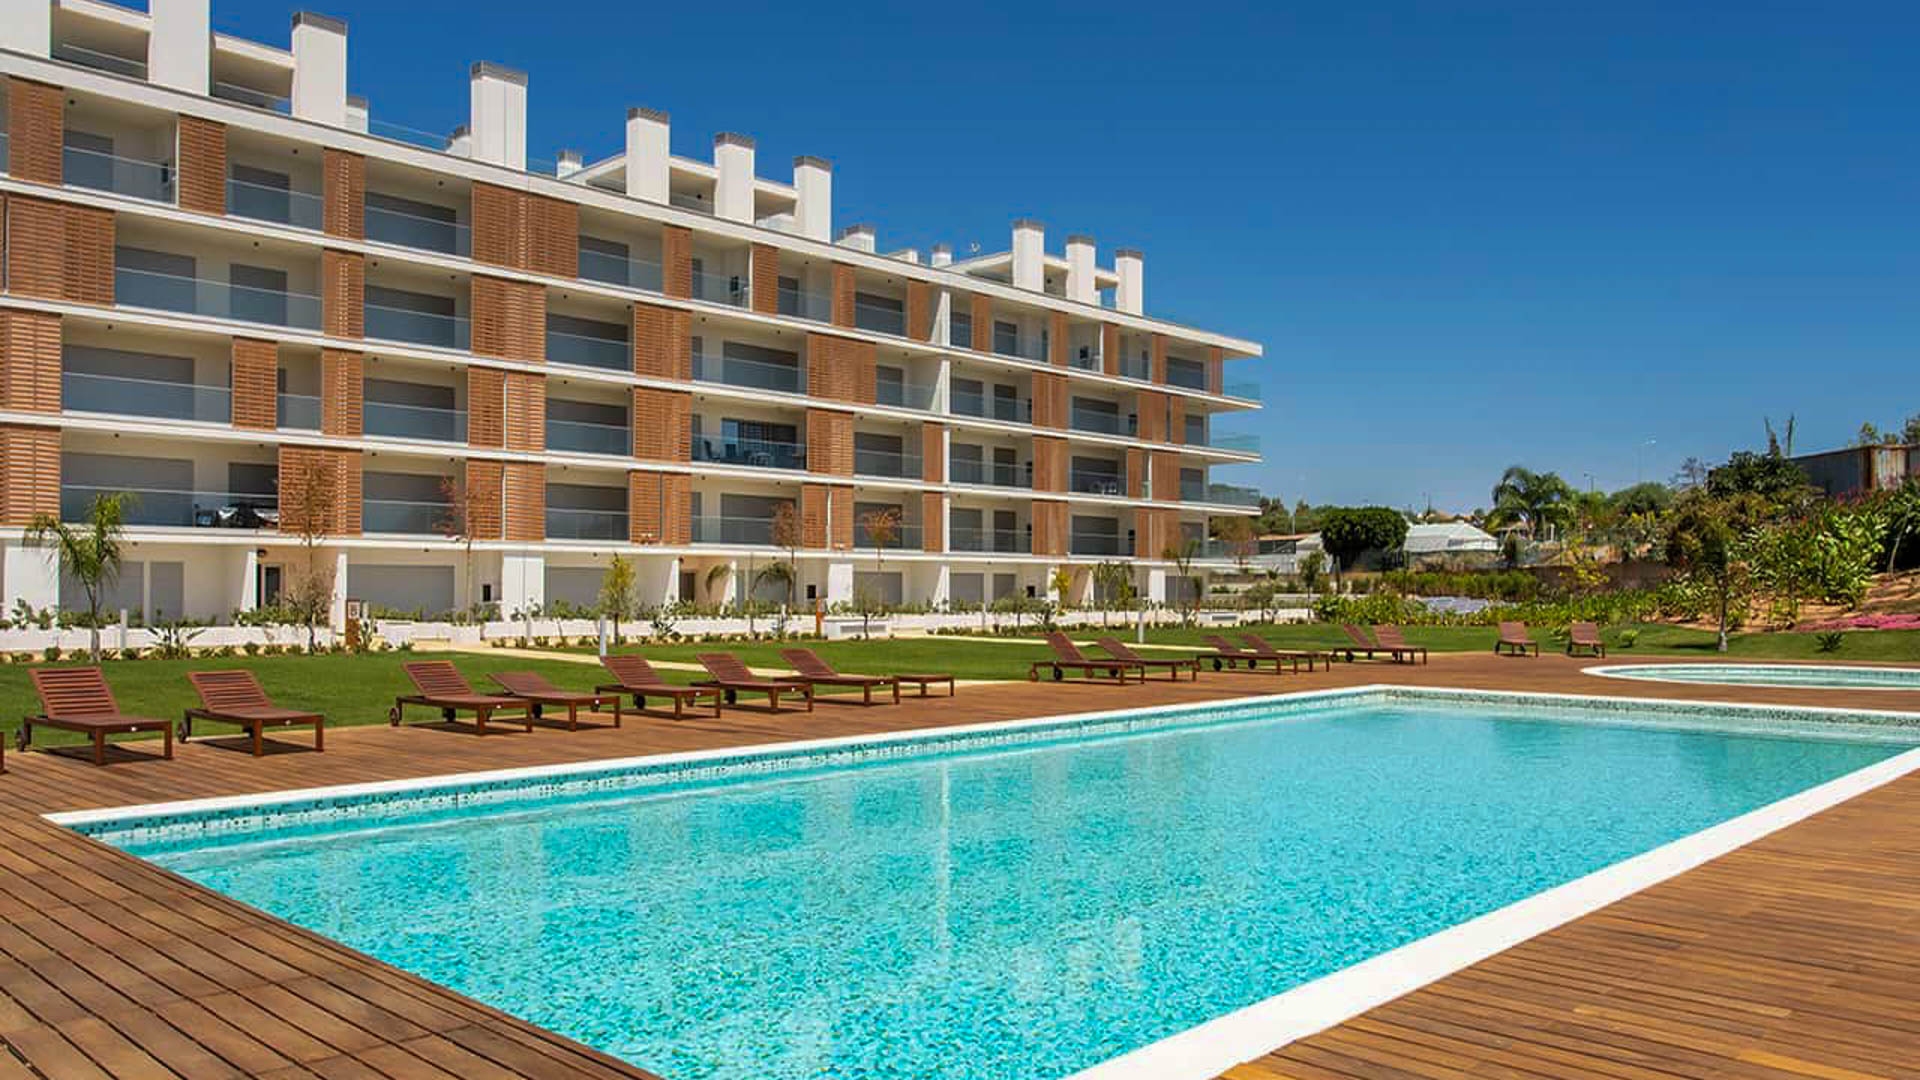 New luxury studio Apartment with pool, Albufeira | VM1868 Luxury studio apartment in a new Eco friendly development, just a stone’s throw from Albufeira’s stunning beaches and amazing amenities.